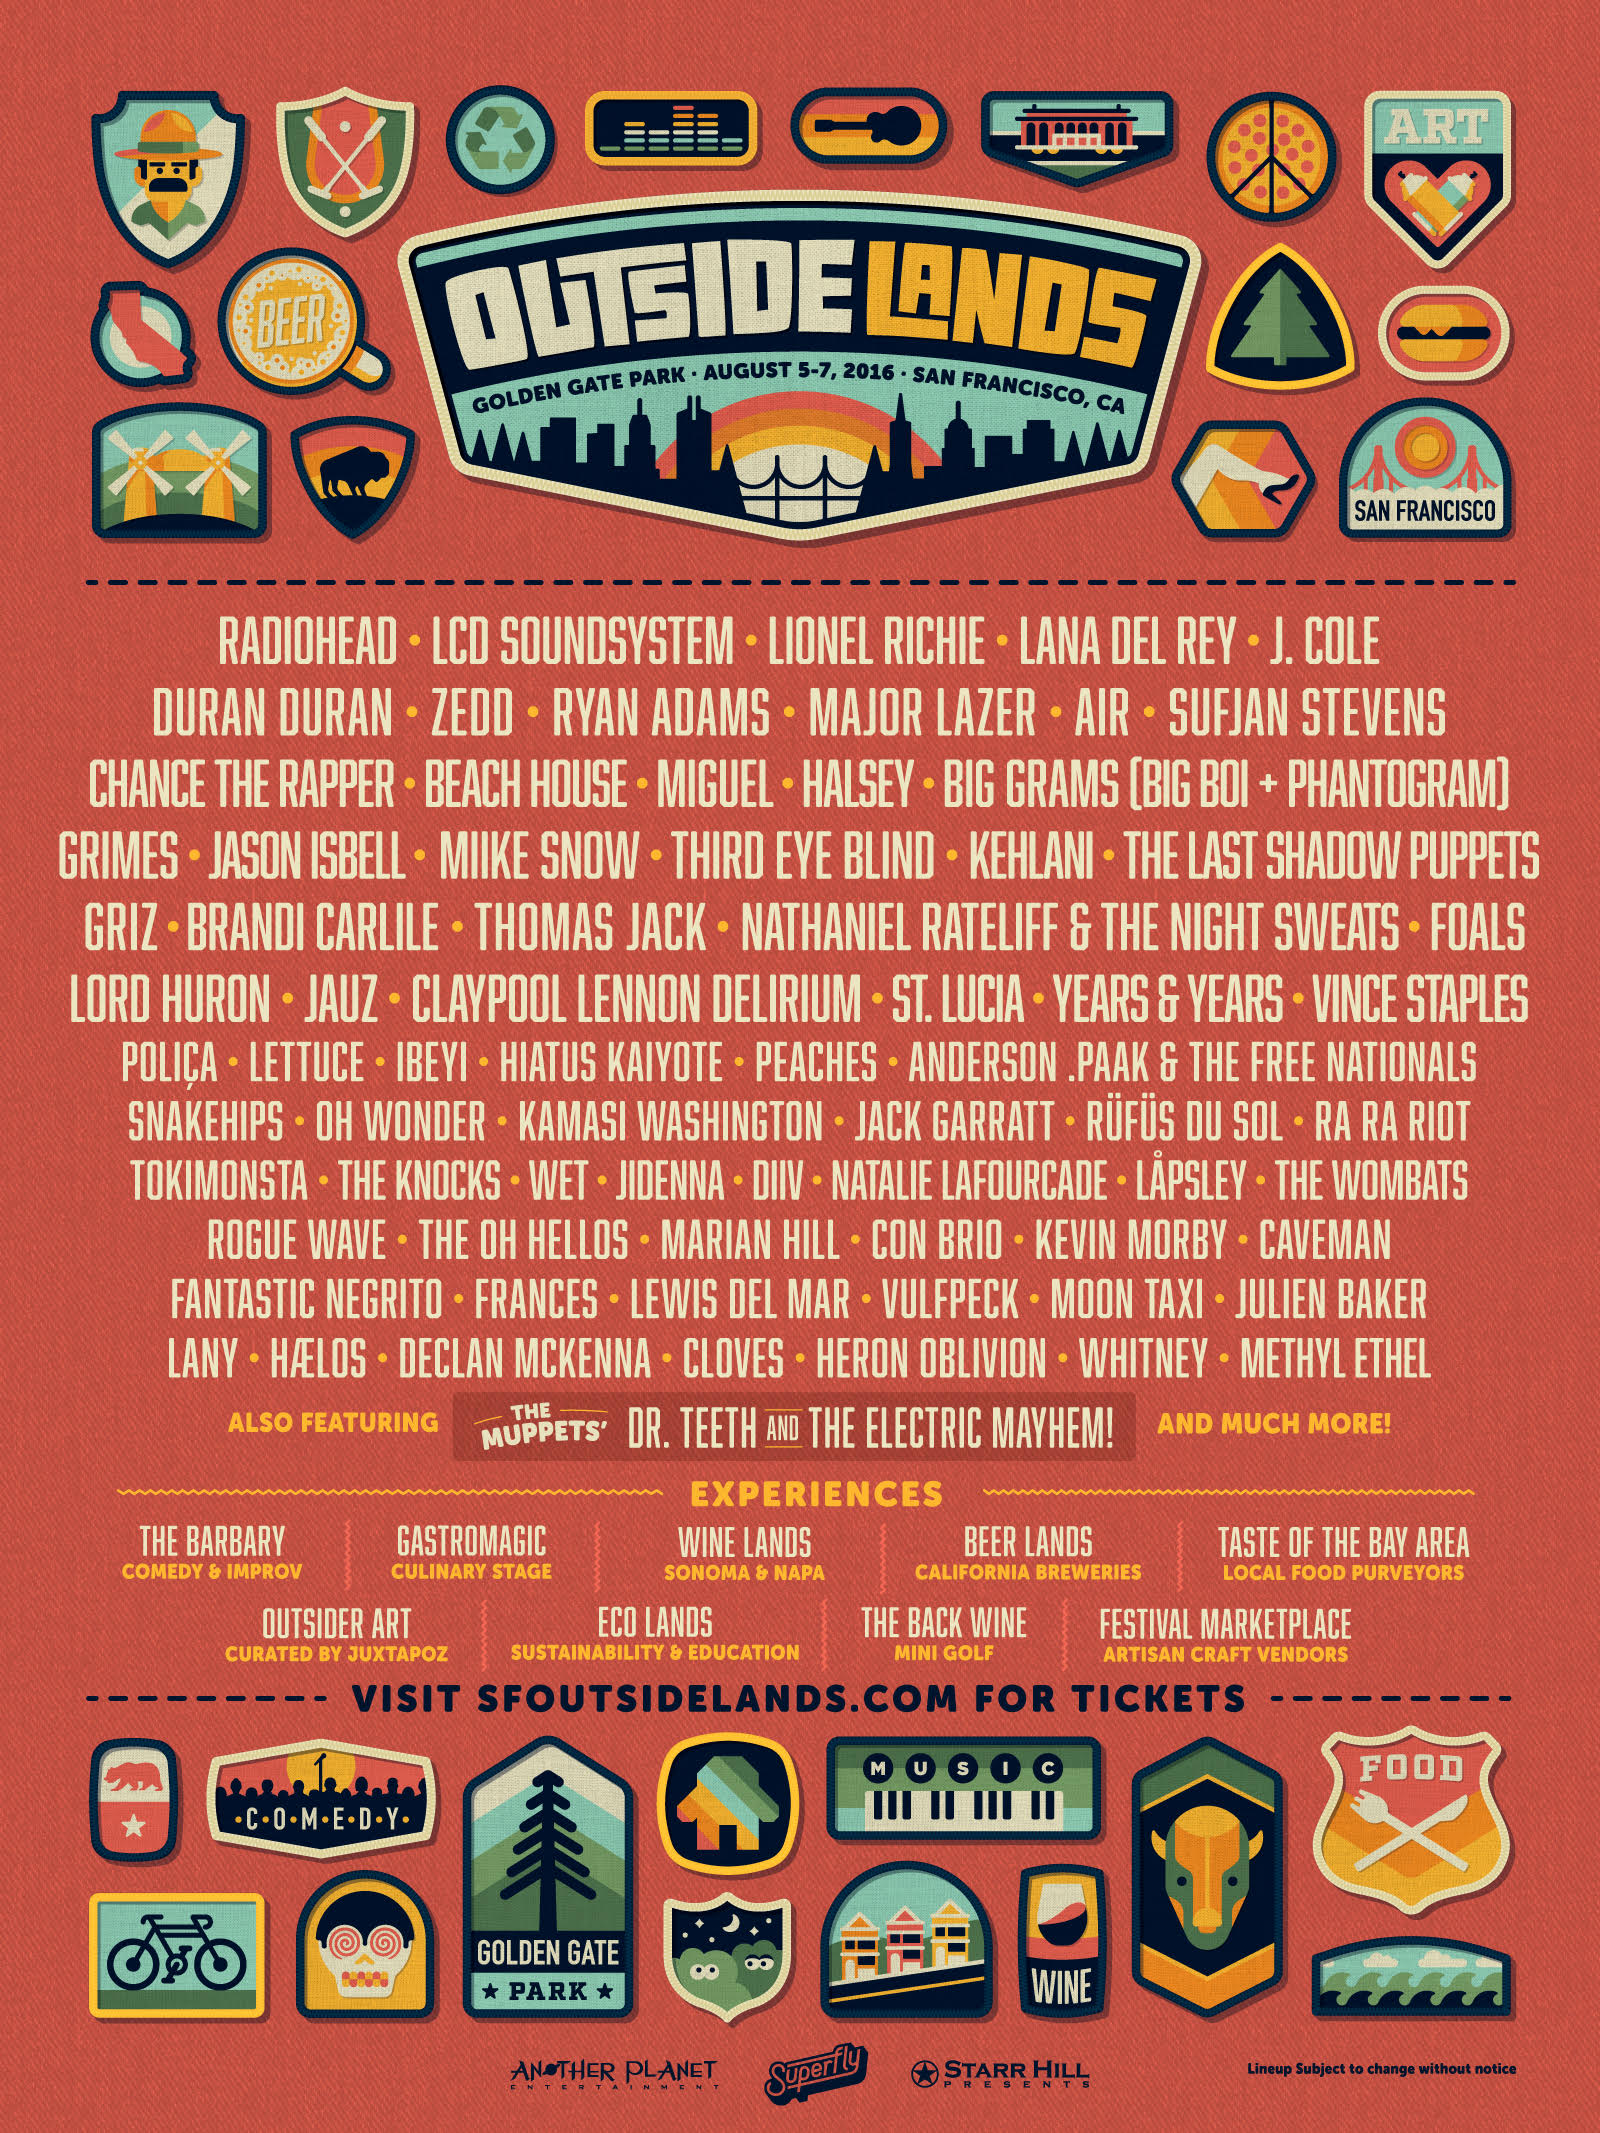 Outside Lands 2016: Radiohead, LCD Soundsystem, Lana Del Rey, and More